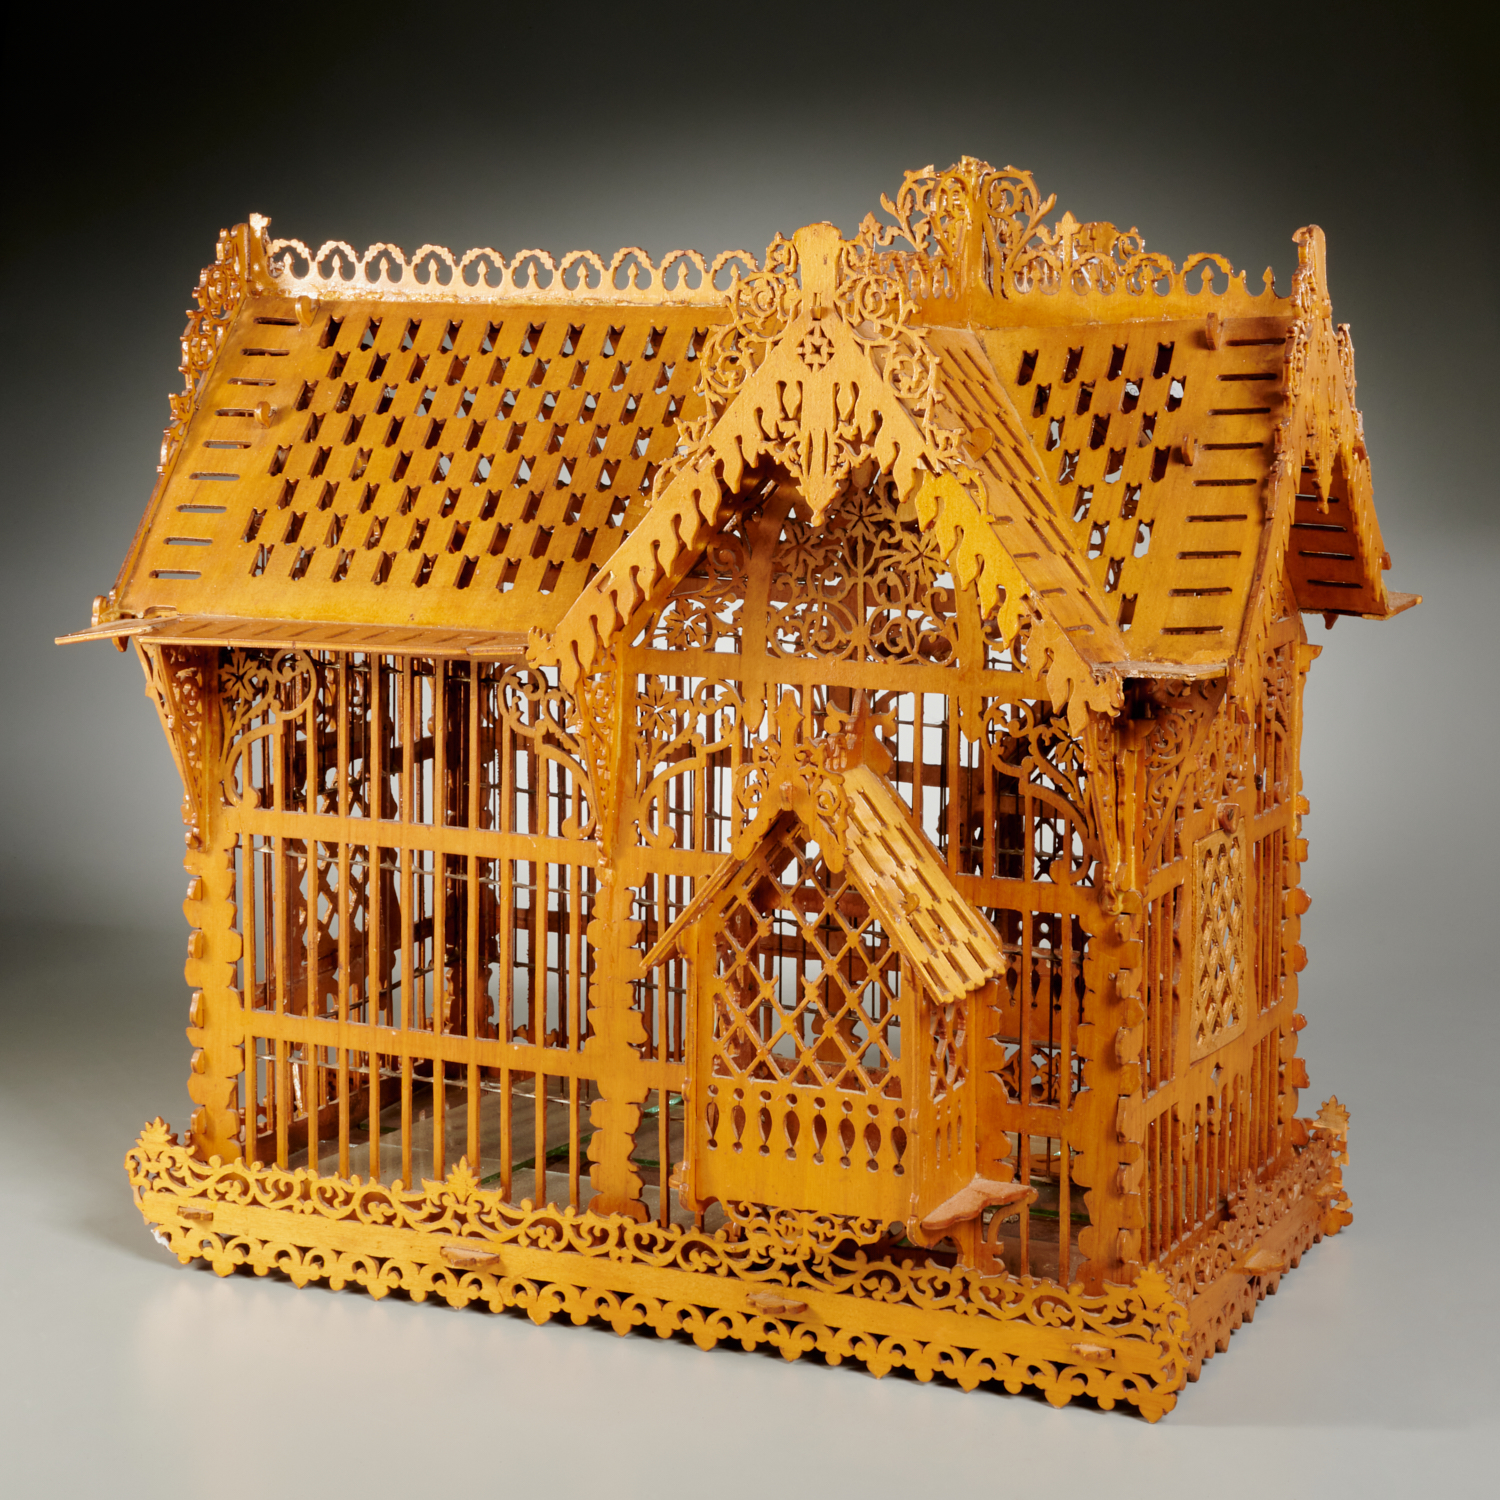 VICTORIAN STYLE AVIARY SOURCED 361b85